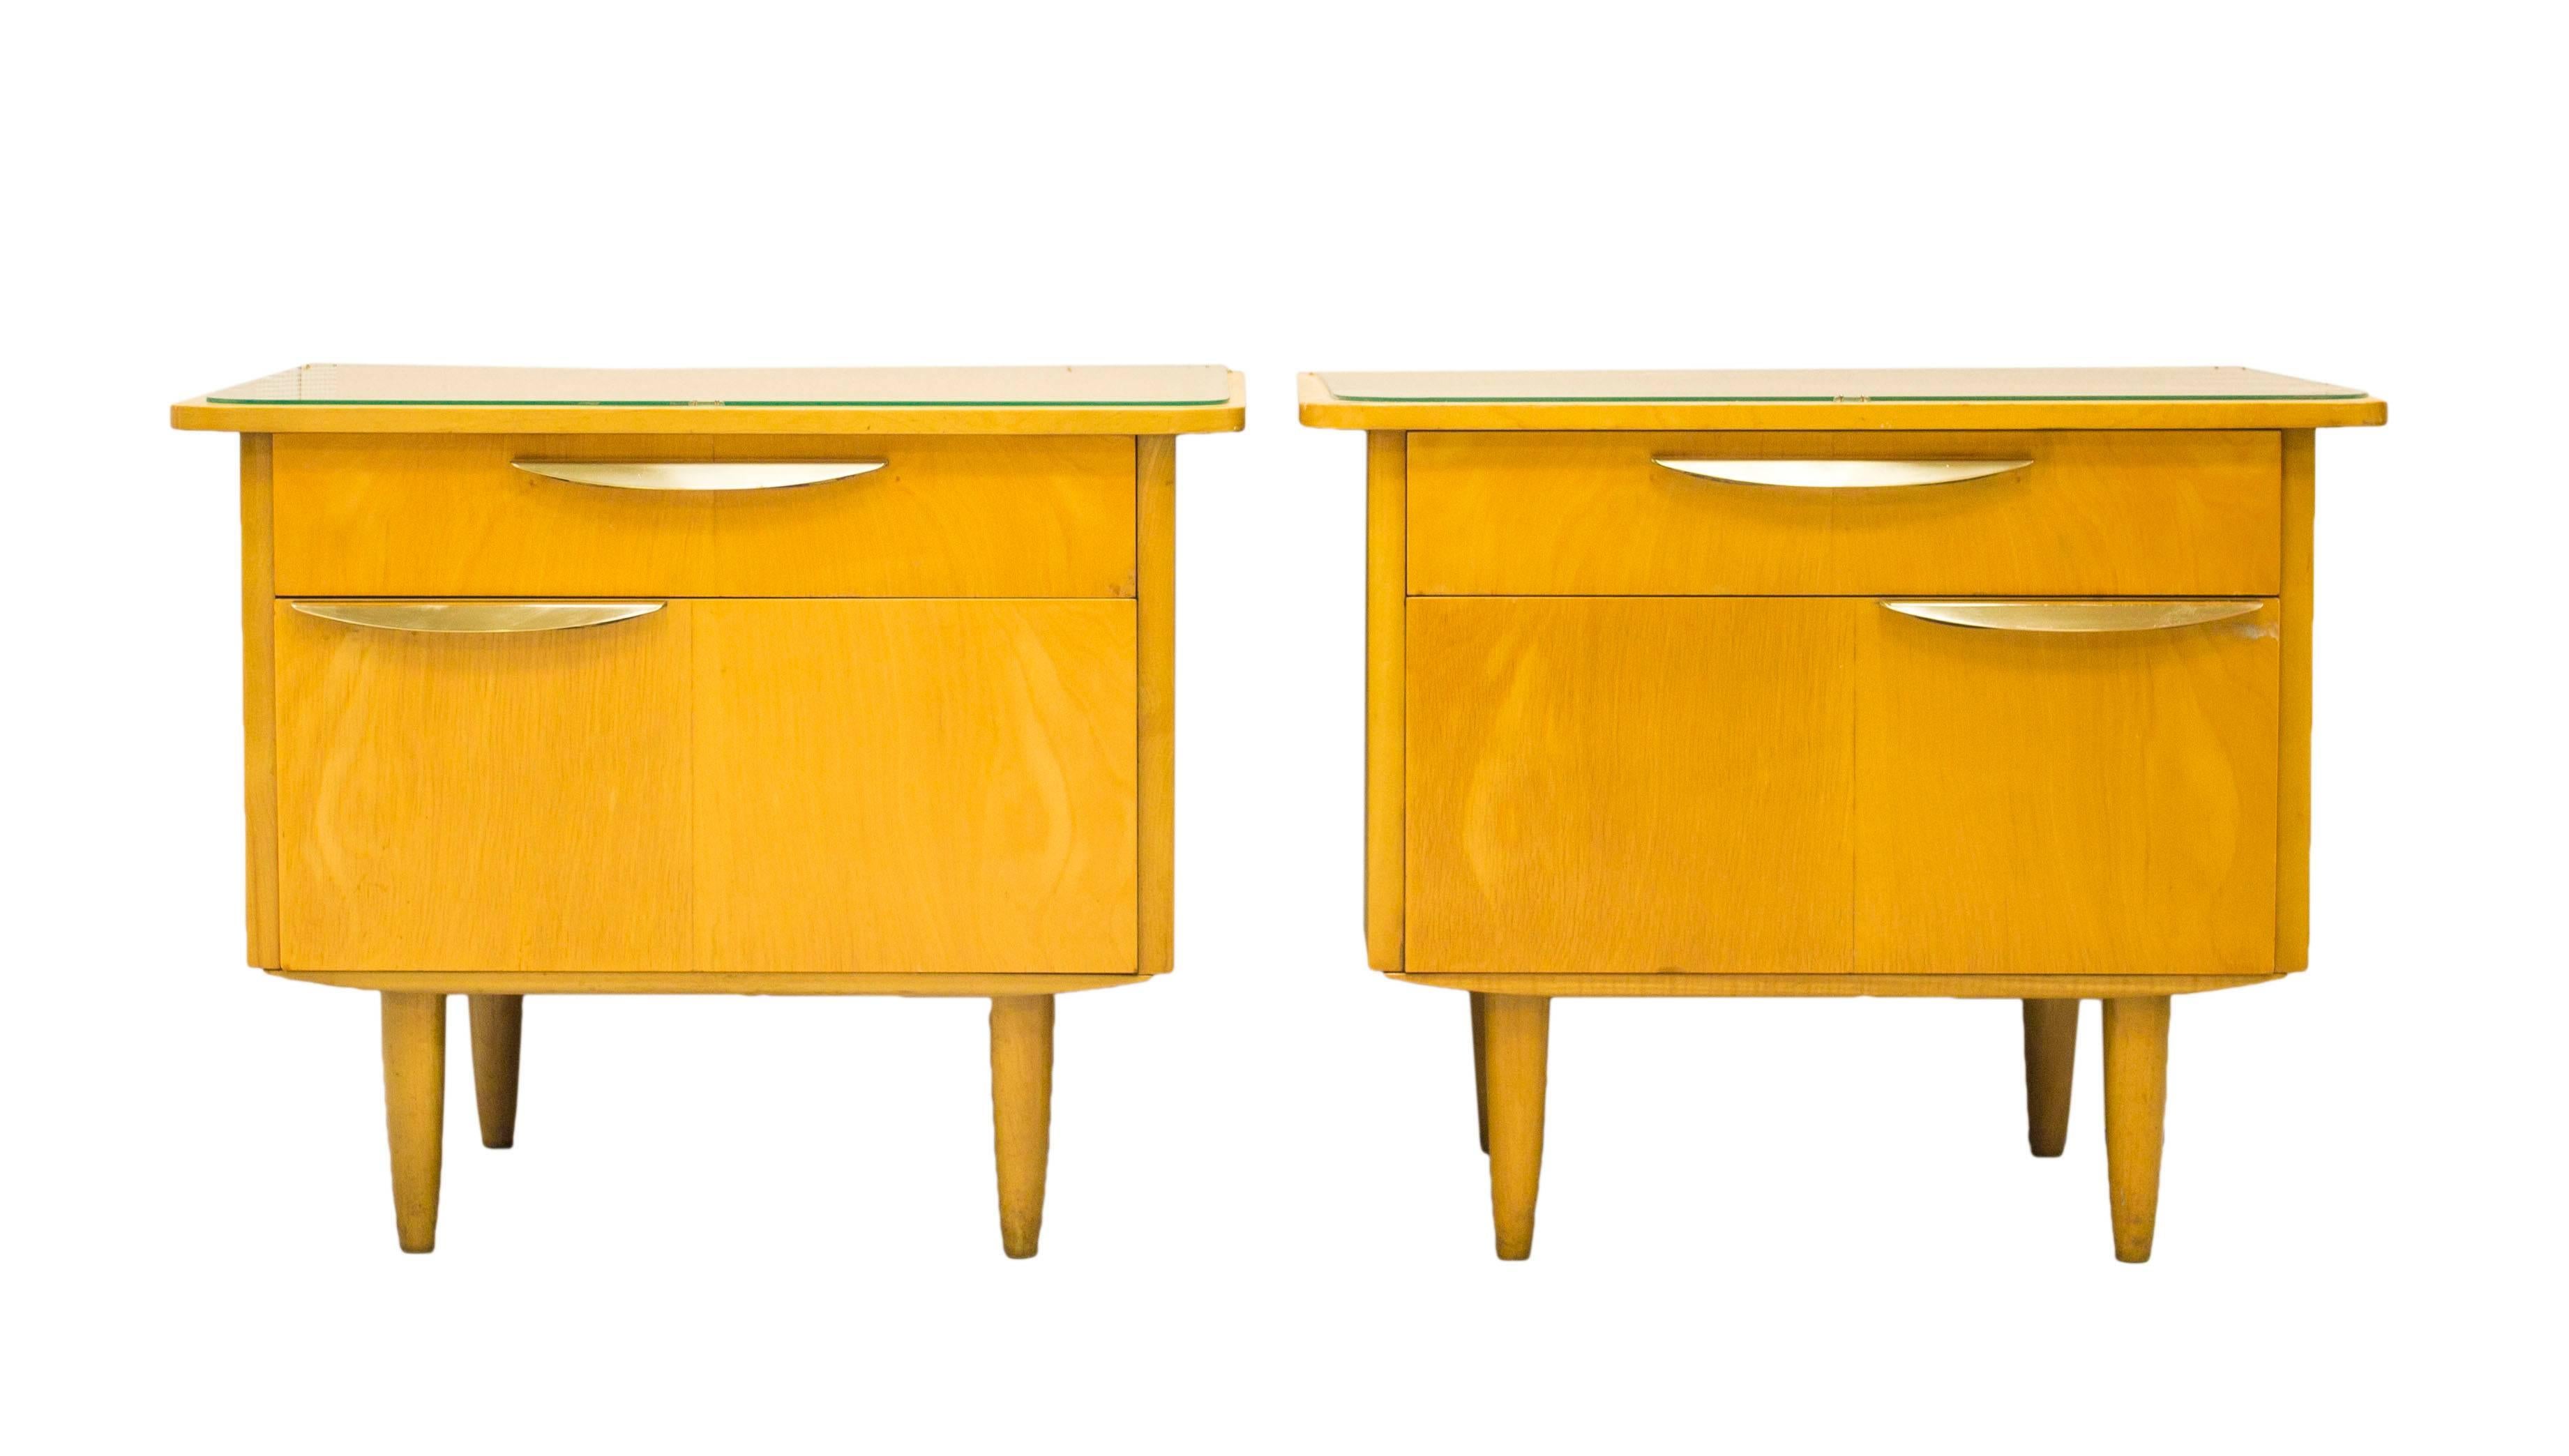 The Italian Mid-Century designers carved their own route, their designs standing apart from those of their Danish and British counterparts, opting for opulence and woods other than teak and rosewood.

Opting for more unusual woods such as sycamore